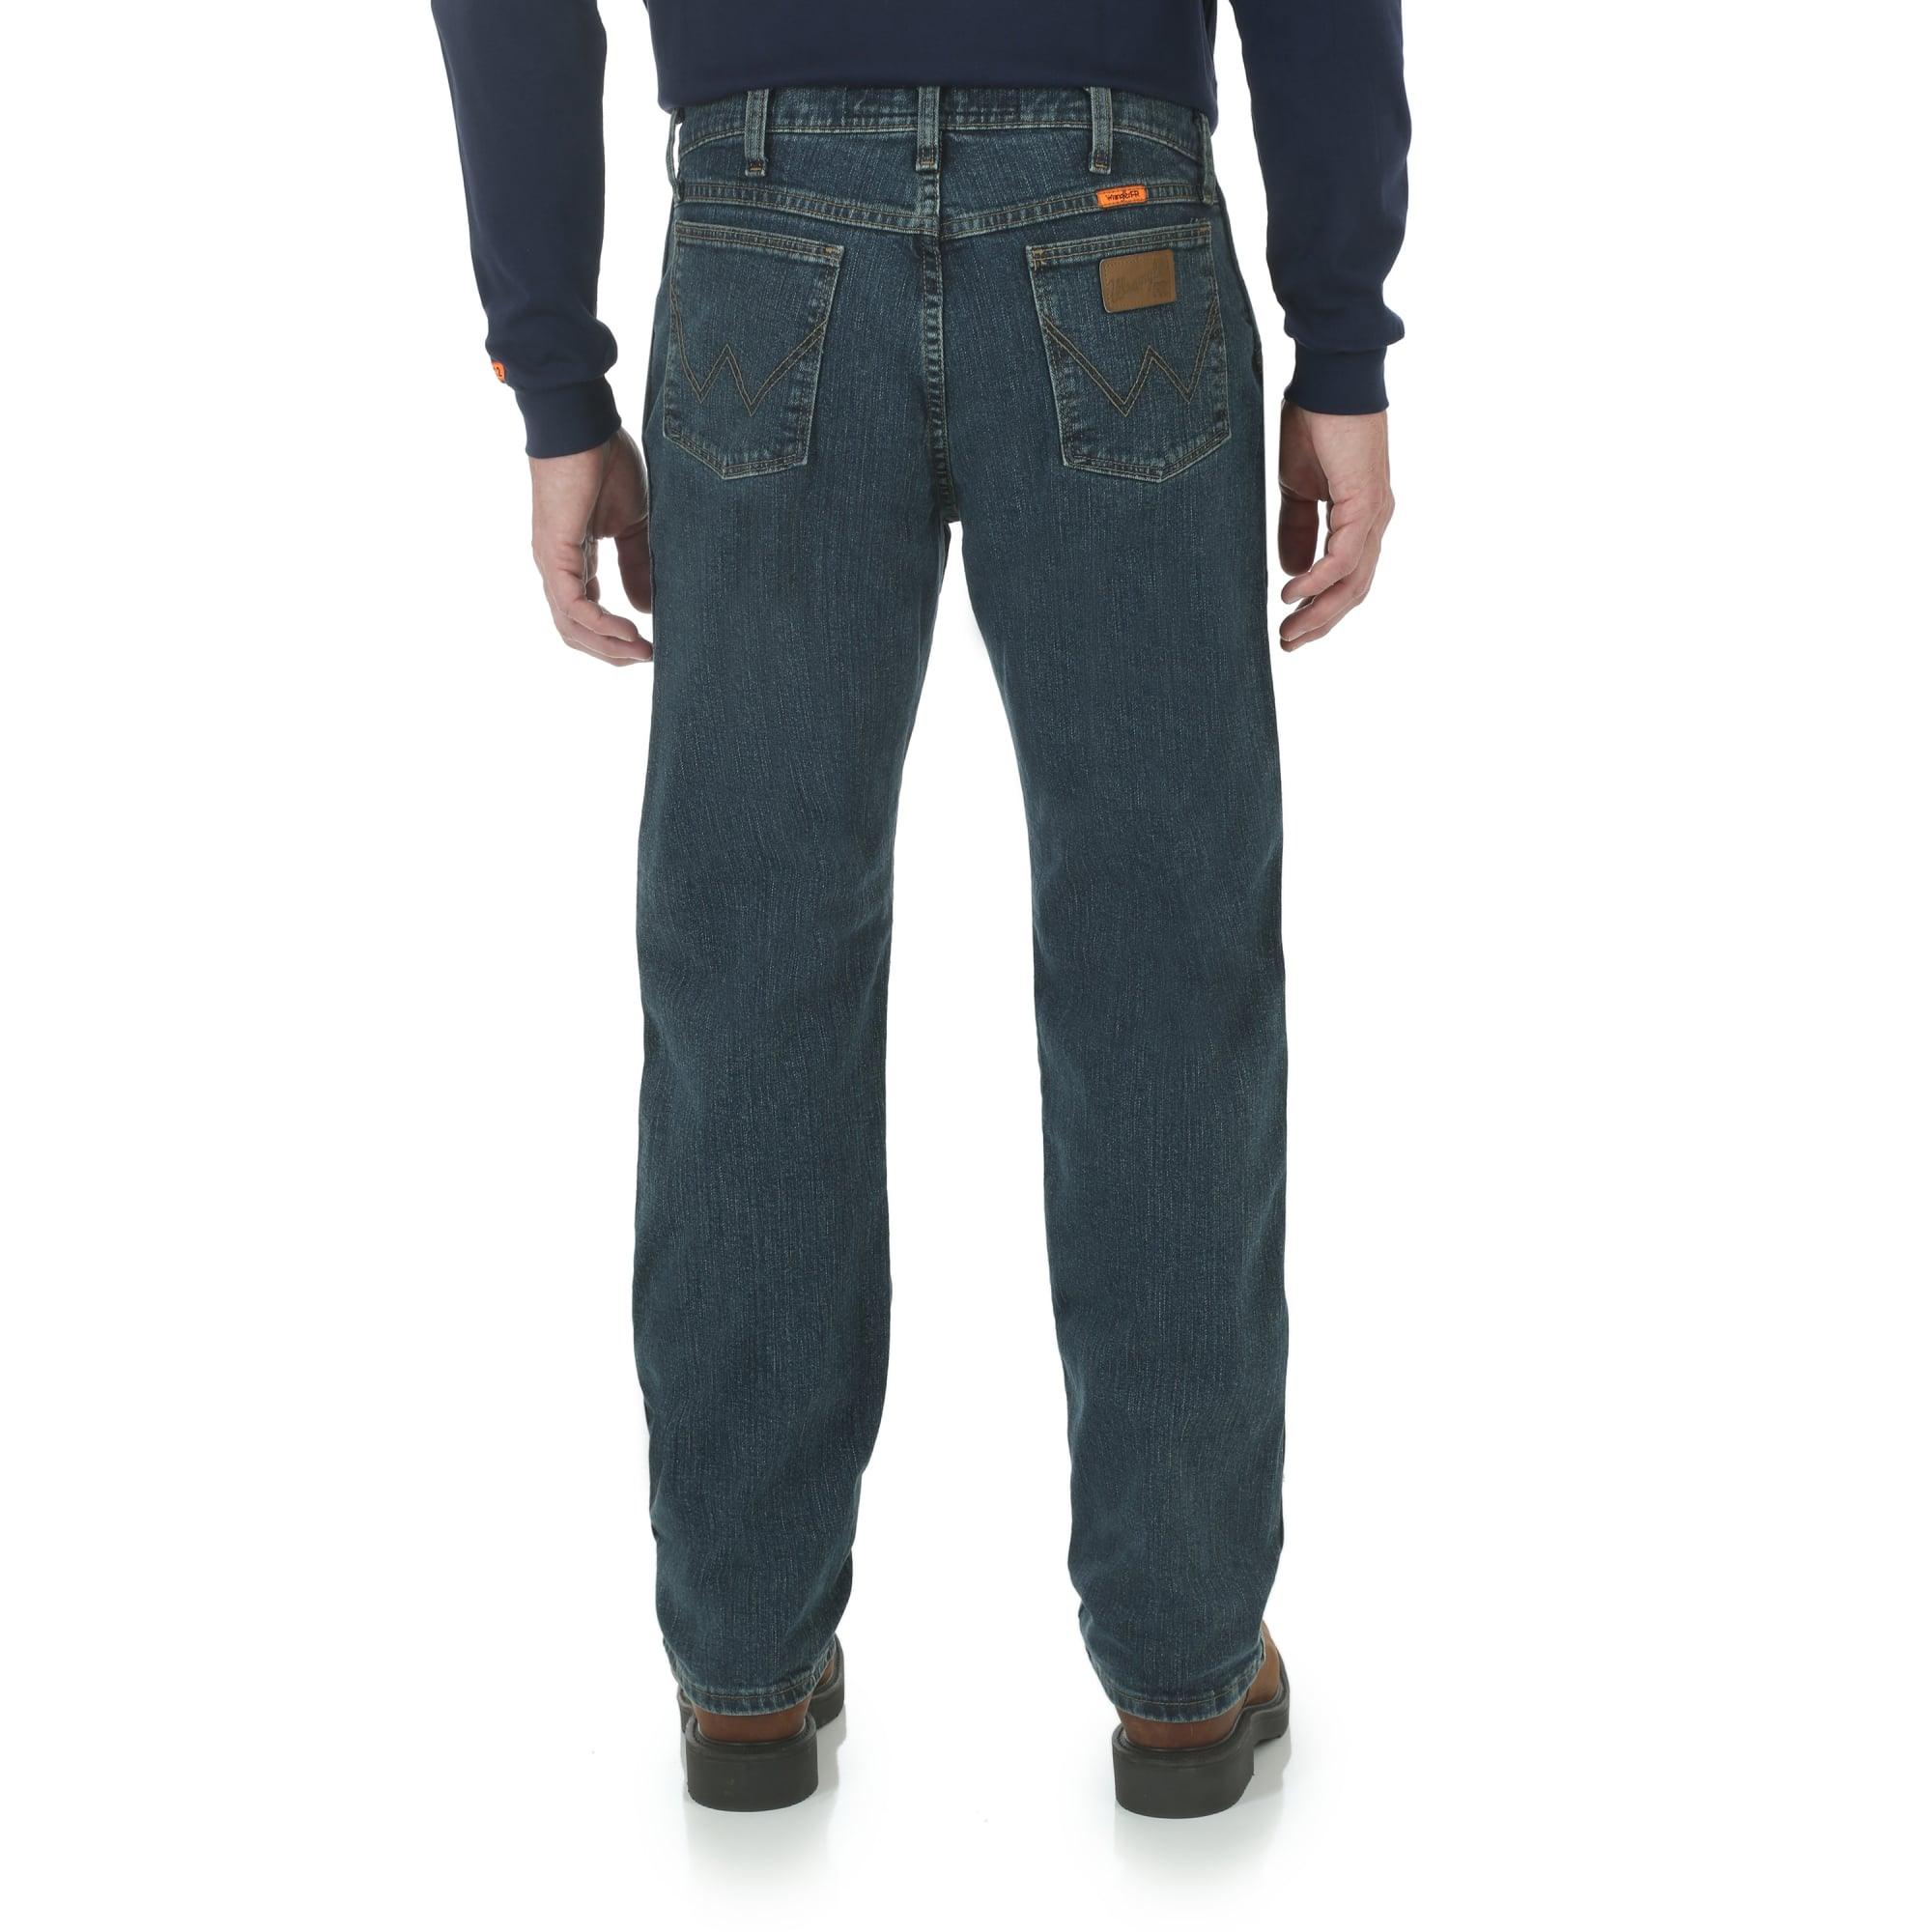 Flame Resistant (FR) Comfort Fit Jean - Purpose-Built / Home of the Trades